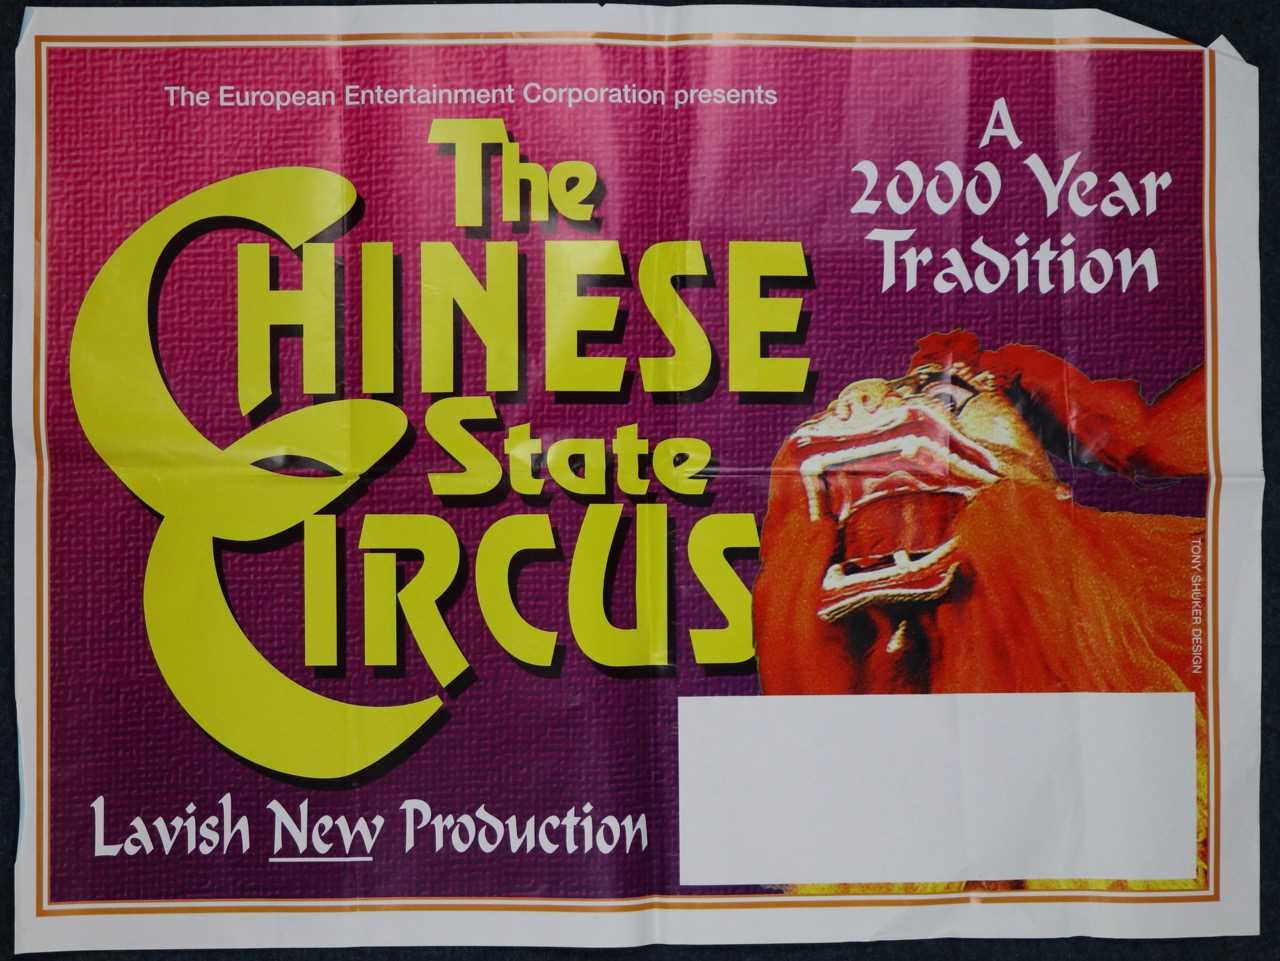 Lot 70 - Large Chinese State Circus posters (2)